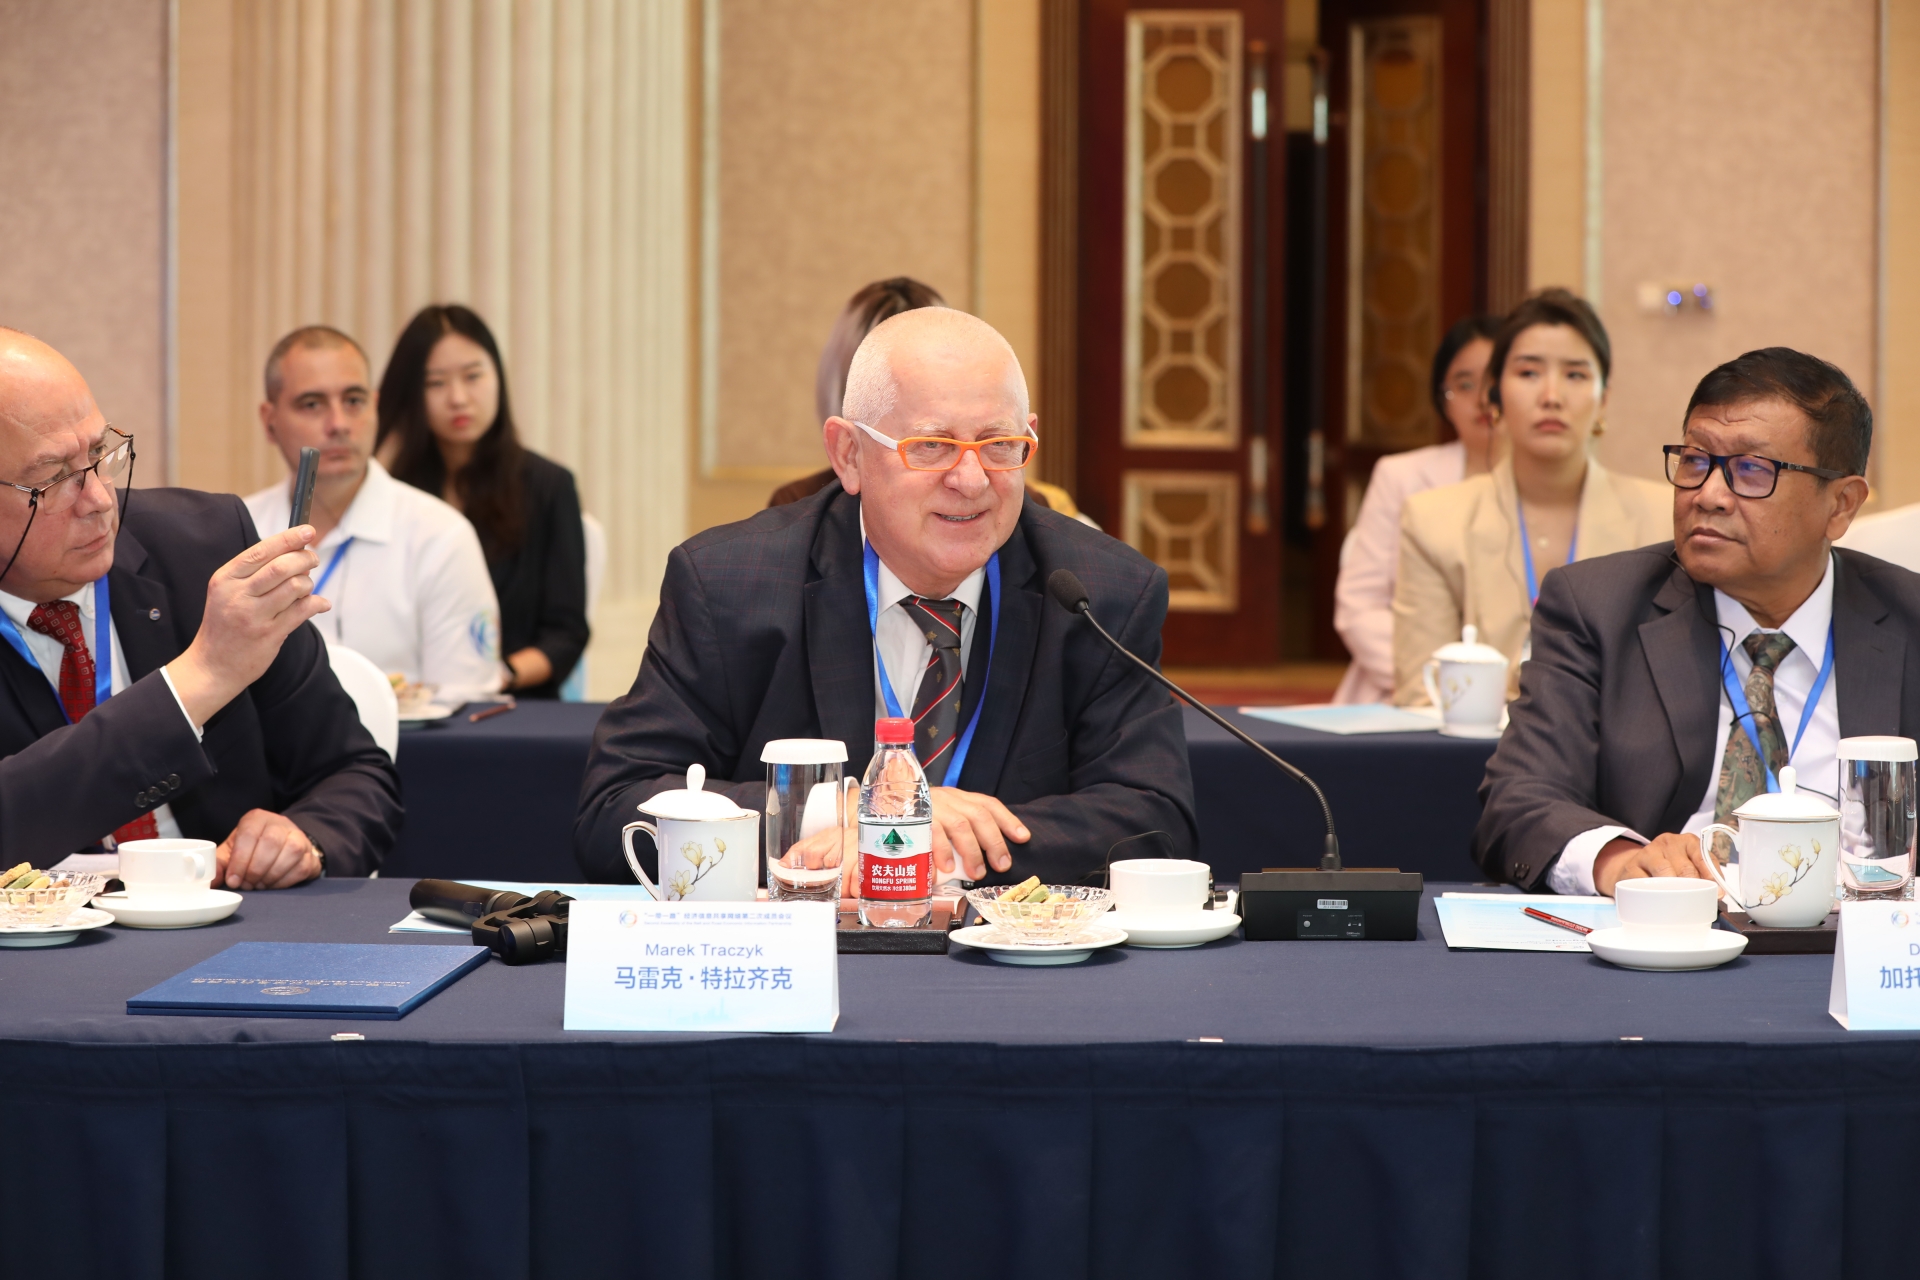 2nd Conference of the Belt and Road Economic Information Partnership